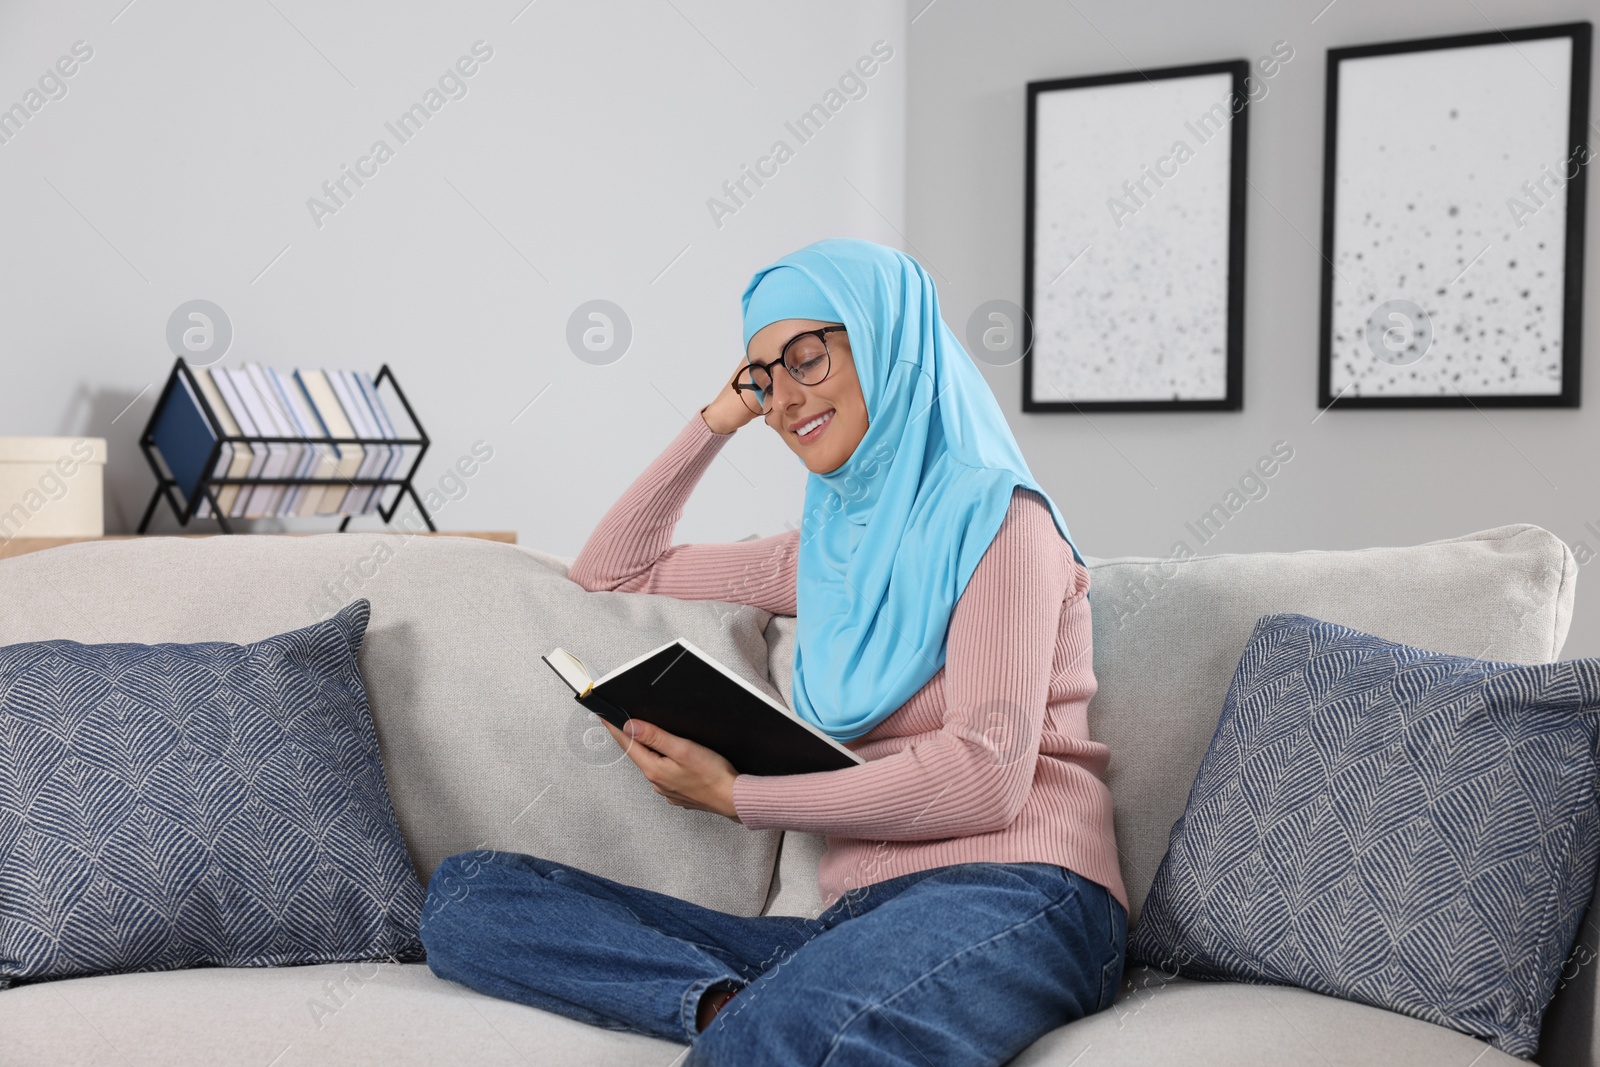 Photo of Muslim woman reading book on couch in room